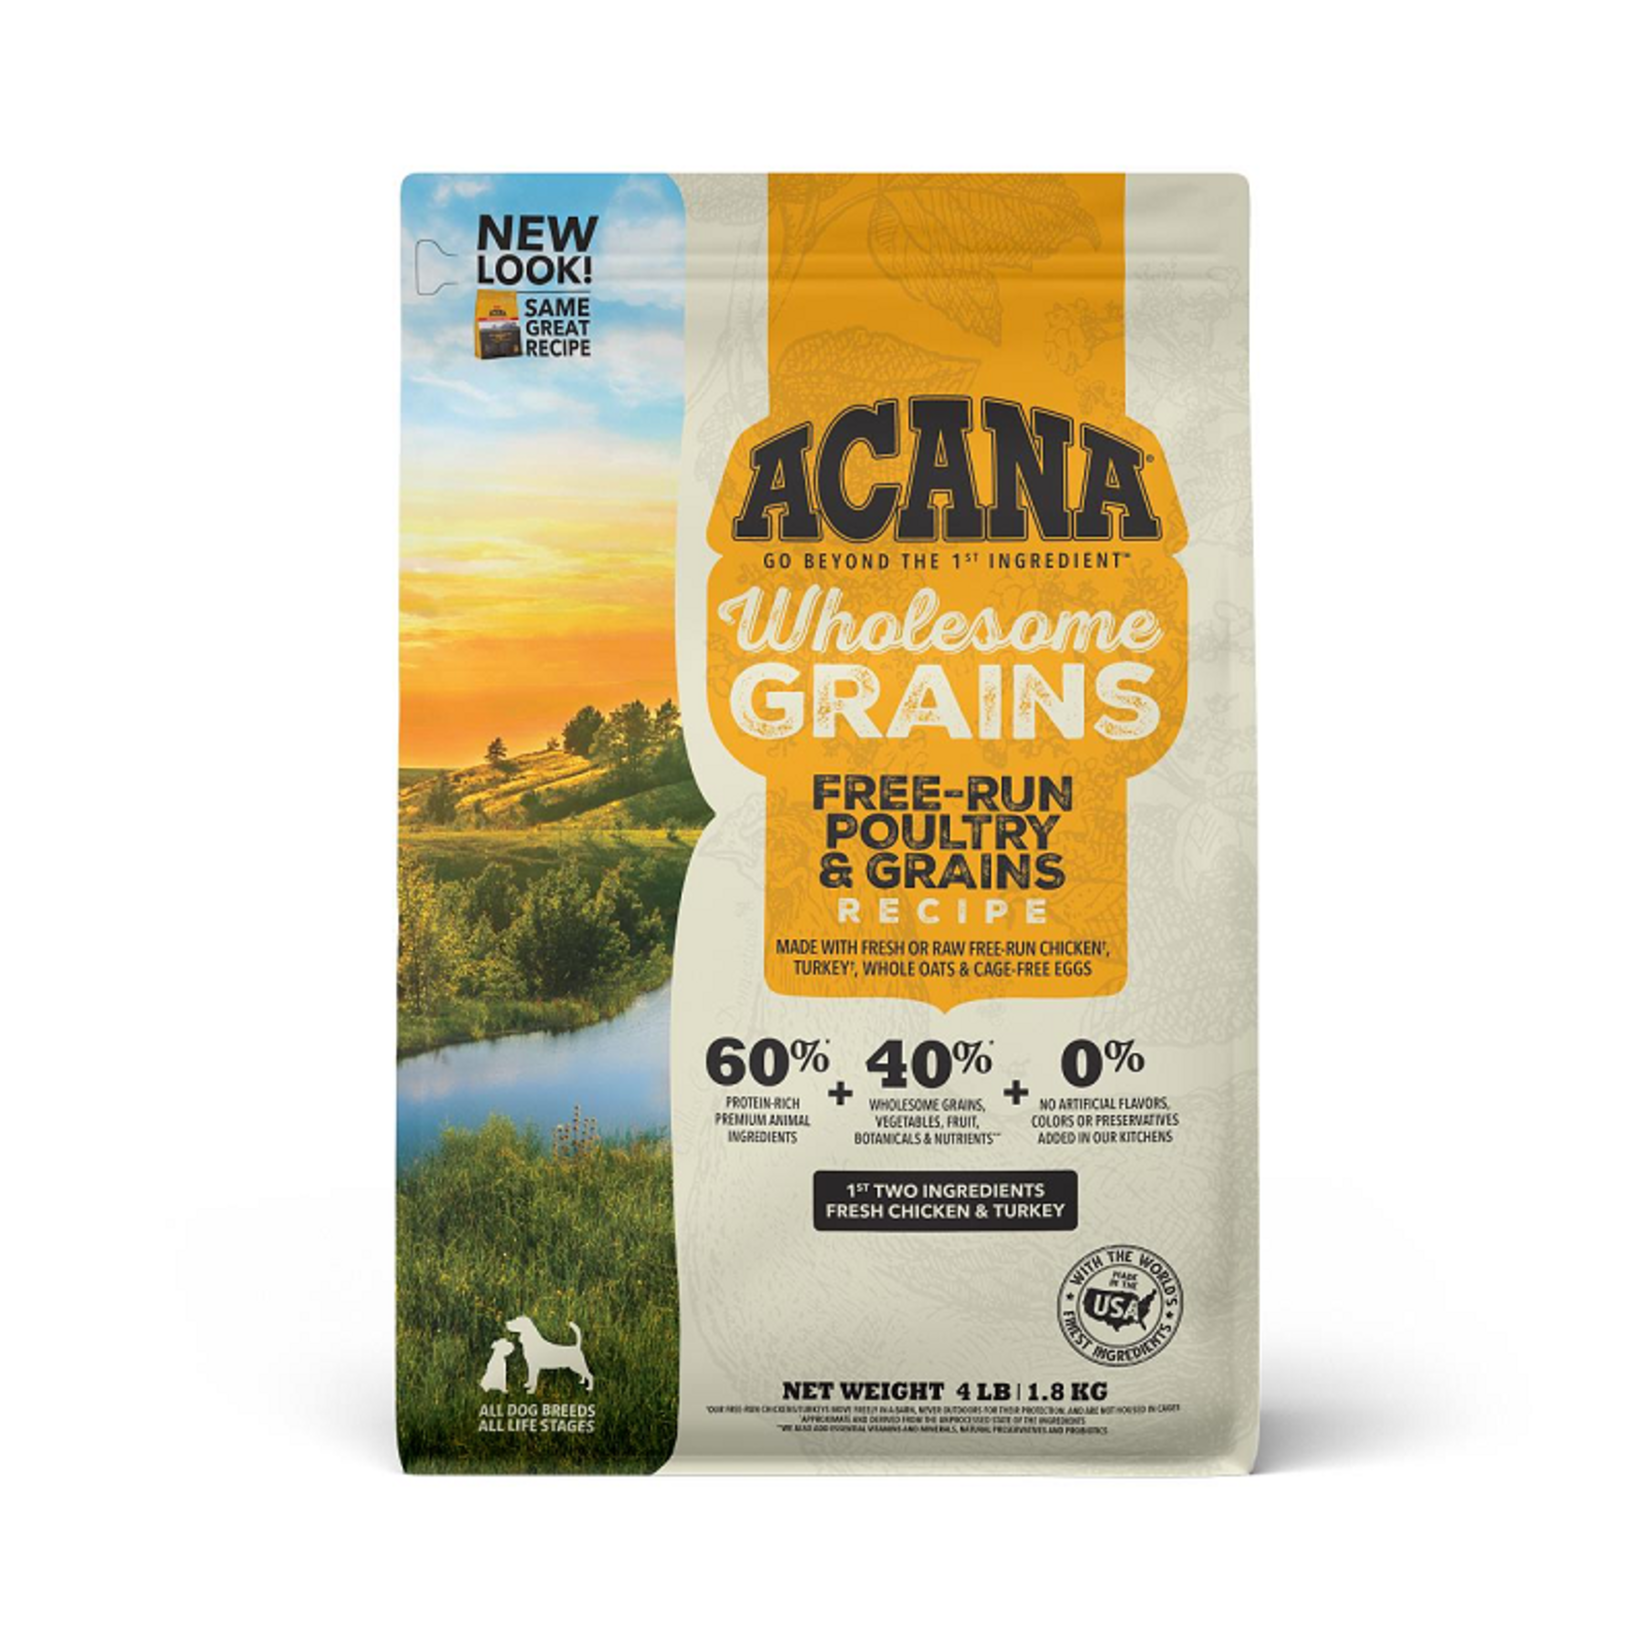 Acana Free-Run Poultry - Wholesome Grains - Acana - Dog